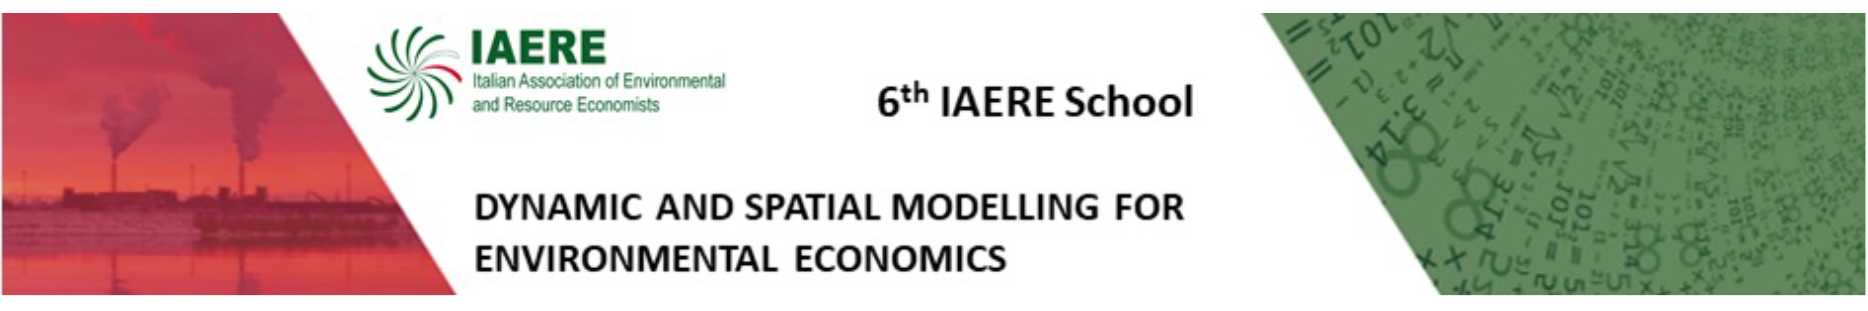 5 th IAERE School on Law and Economics of the Circular Economy Transition